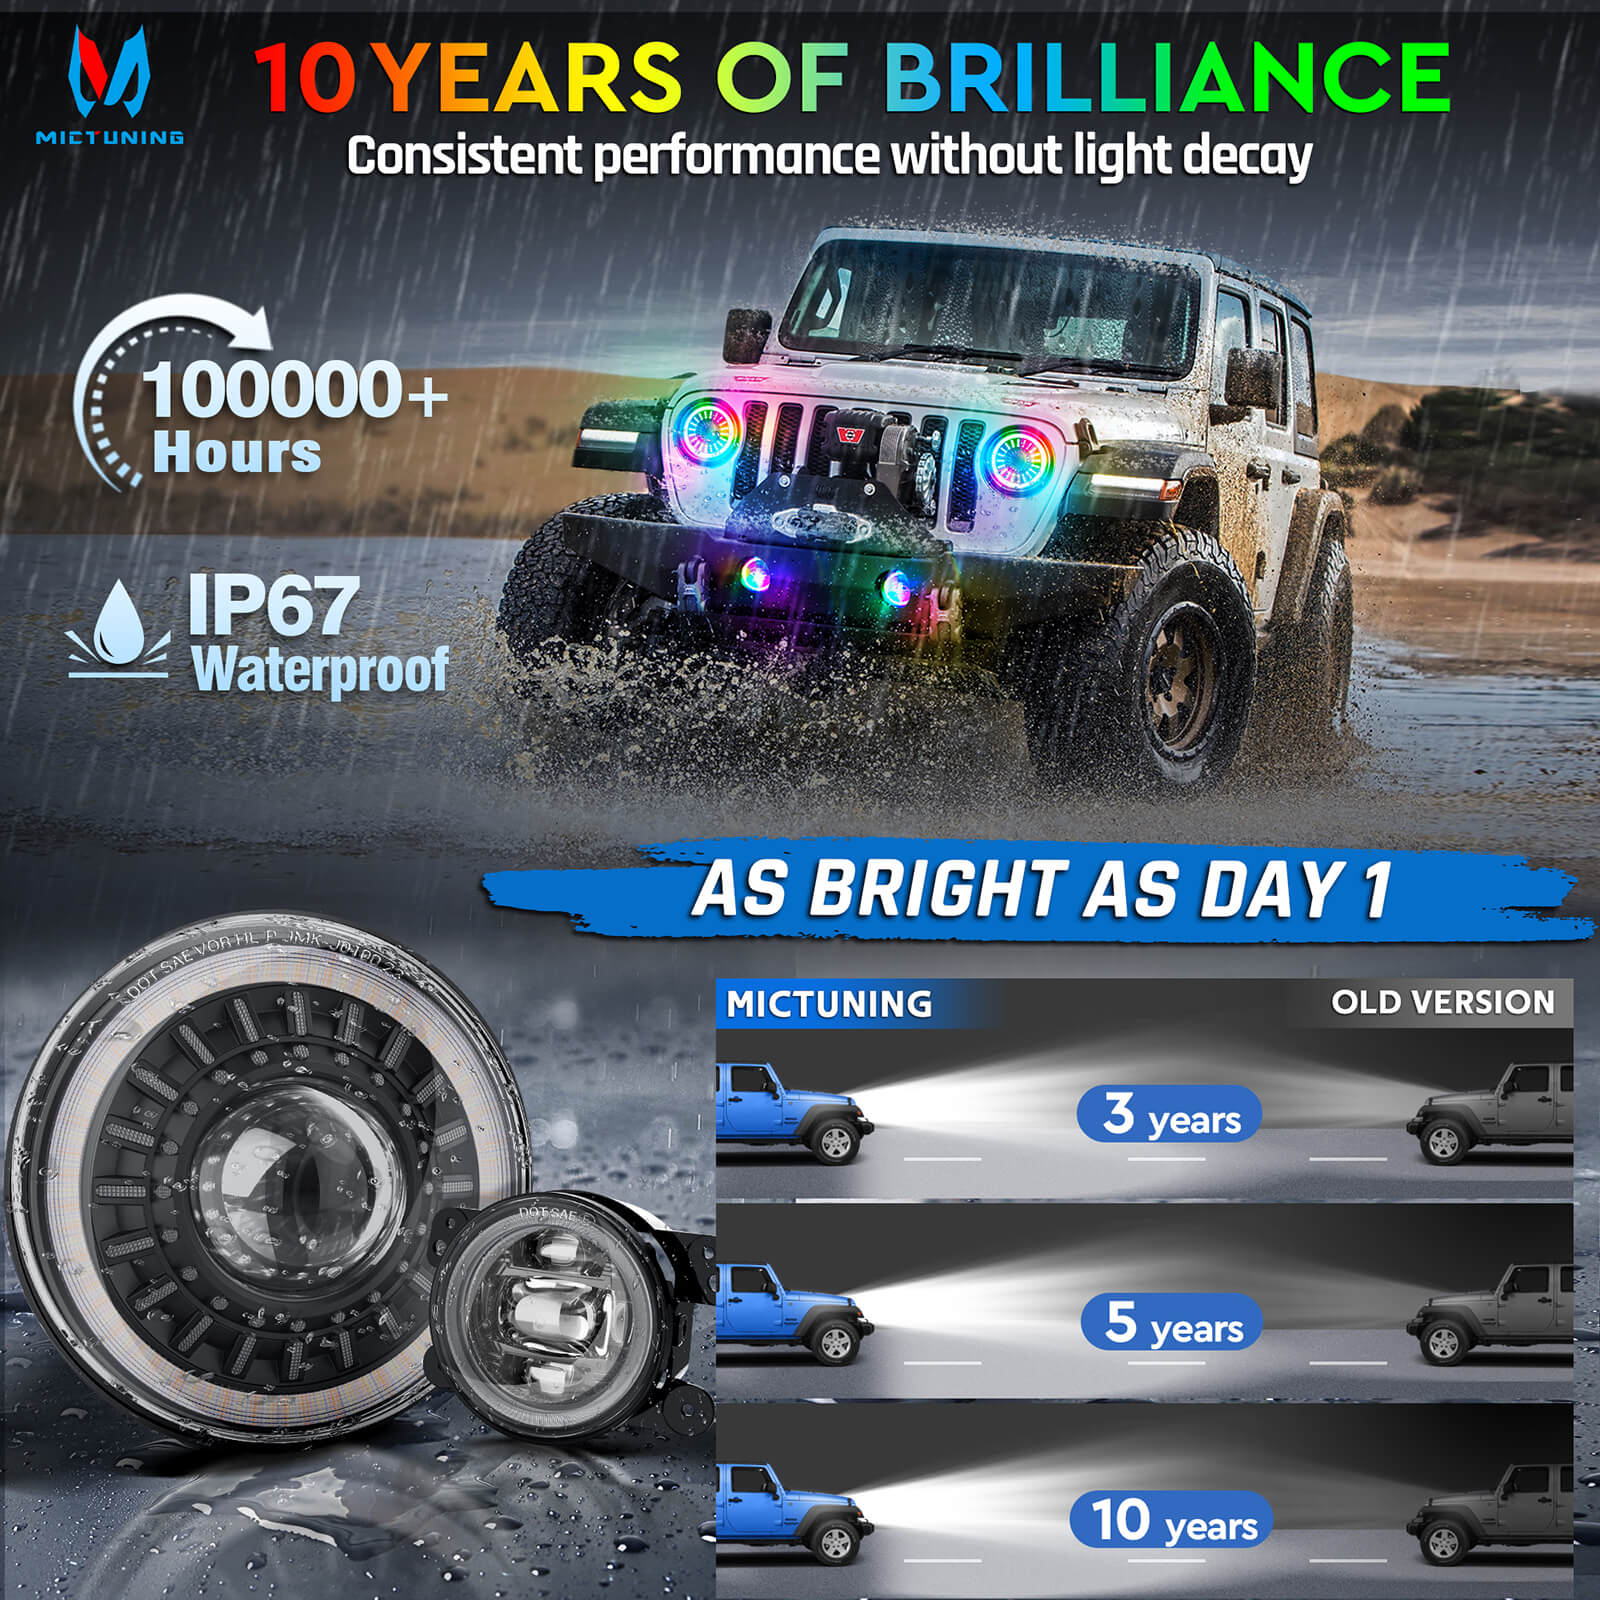 J1 RGB+IC 7″ LED Headlights with Fog Lights Assembly, Multi-color Chasing, DOT Approved For 1997-2018 Jeep Wrangler TJ JK Chevy Ford GMC